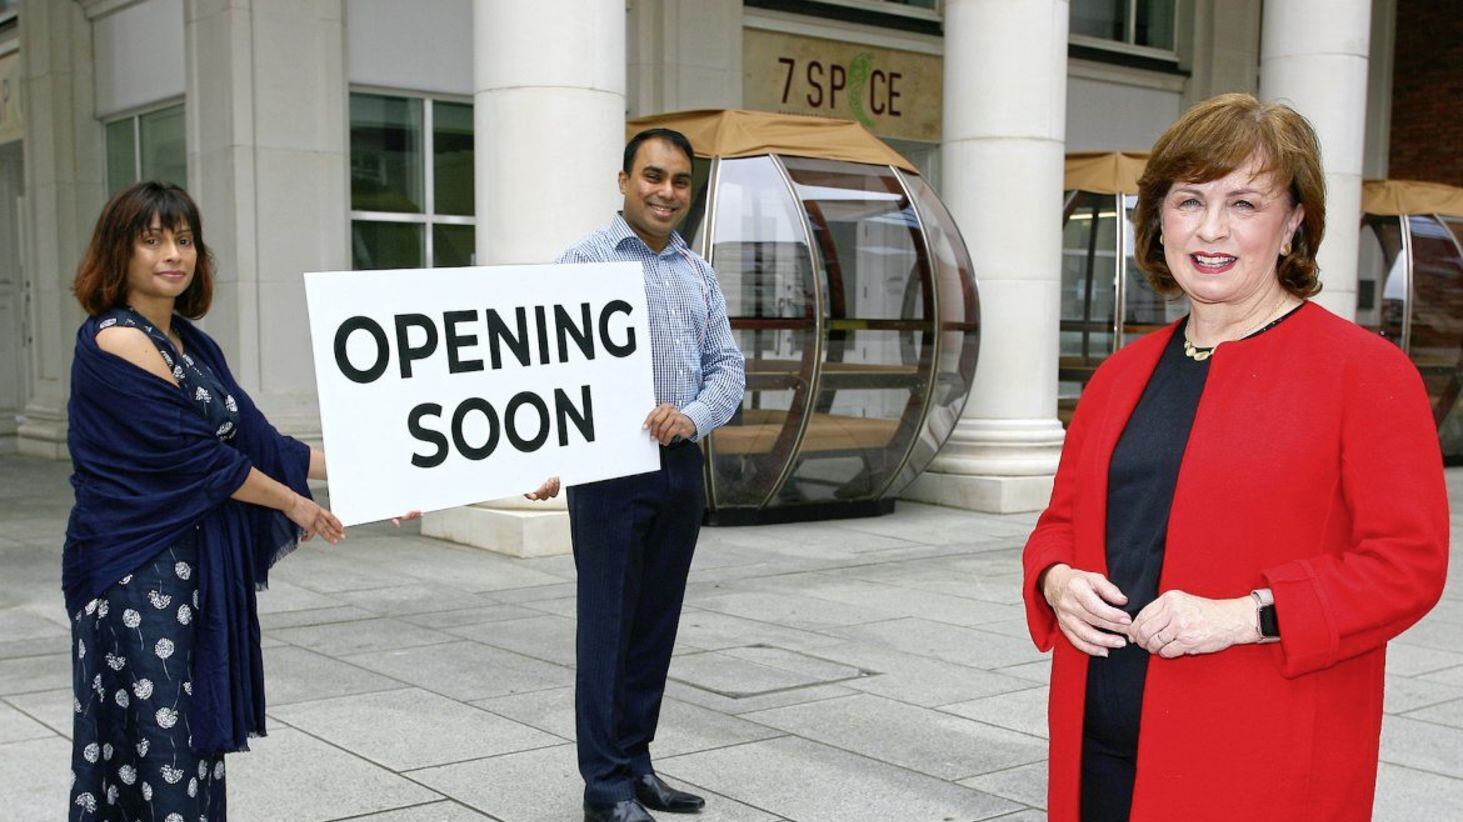 Luthfur Ahmed and wife Fably Khanam show economy minister Diane Dodds the purpose-build pods at 7Spice, a new Bangladeshi restaurant due to open in Belfast&rsquo;s St Anne&rsquo;s Square in mid-October 